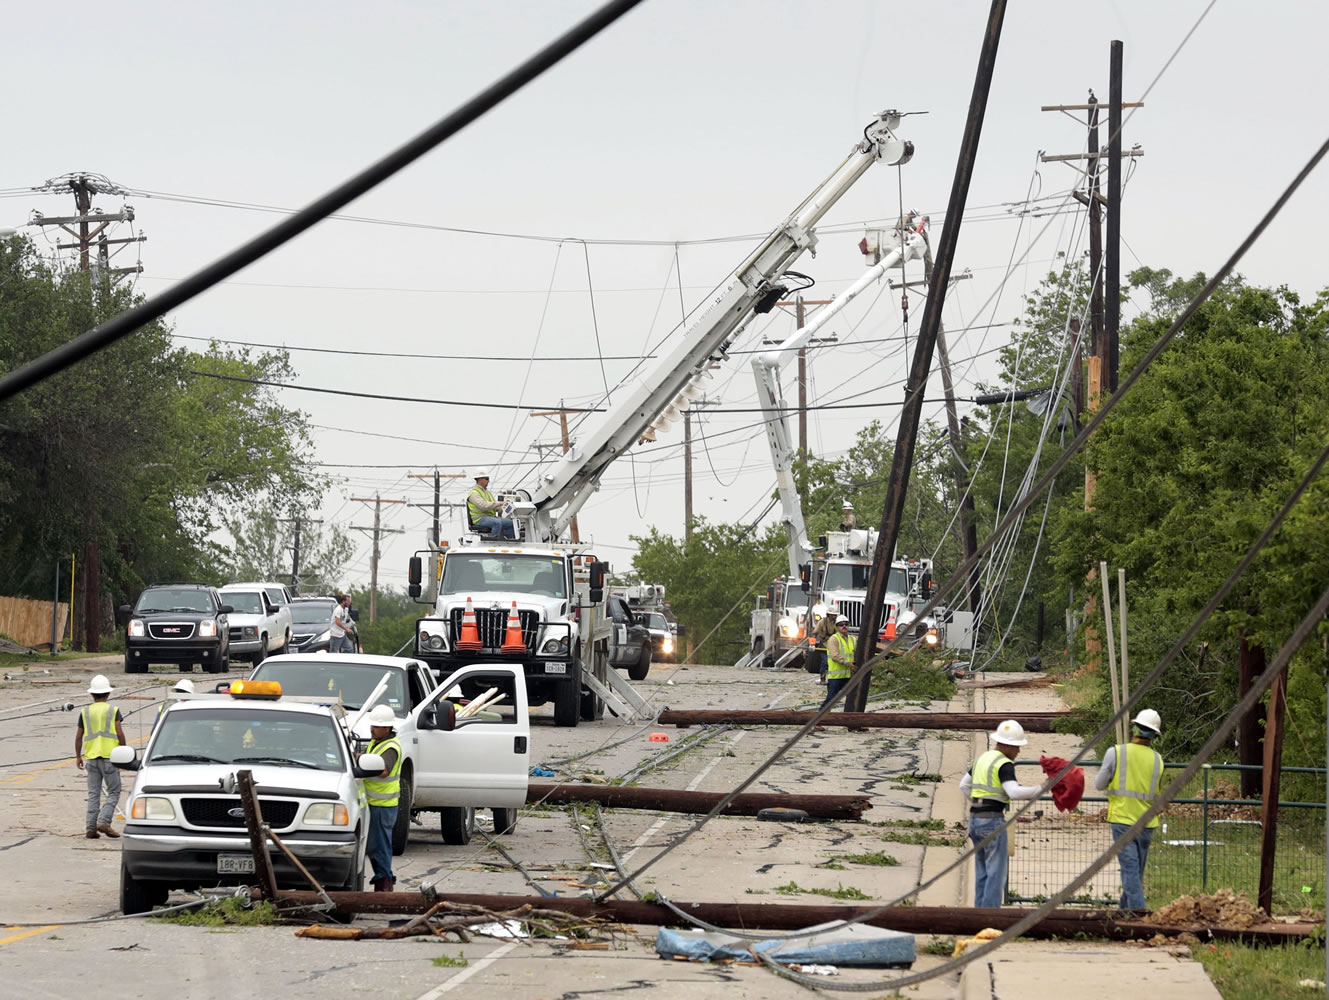 Utility workers try to restore electric power on down lines on Thursday, May 16, 2013, in Cleburne, Texas. A rash of tornadoes slammed into several small communities in North Texas overnight, leaving at least six people dead, dozens more injured and hundreds homeless.